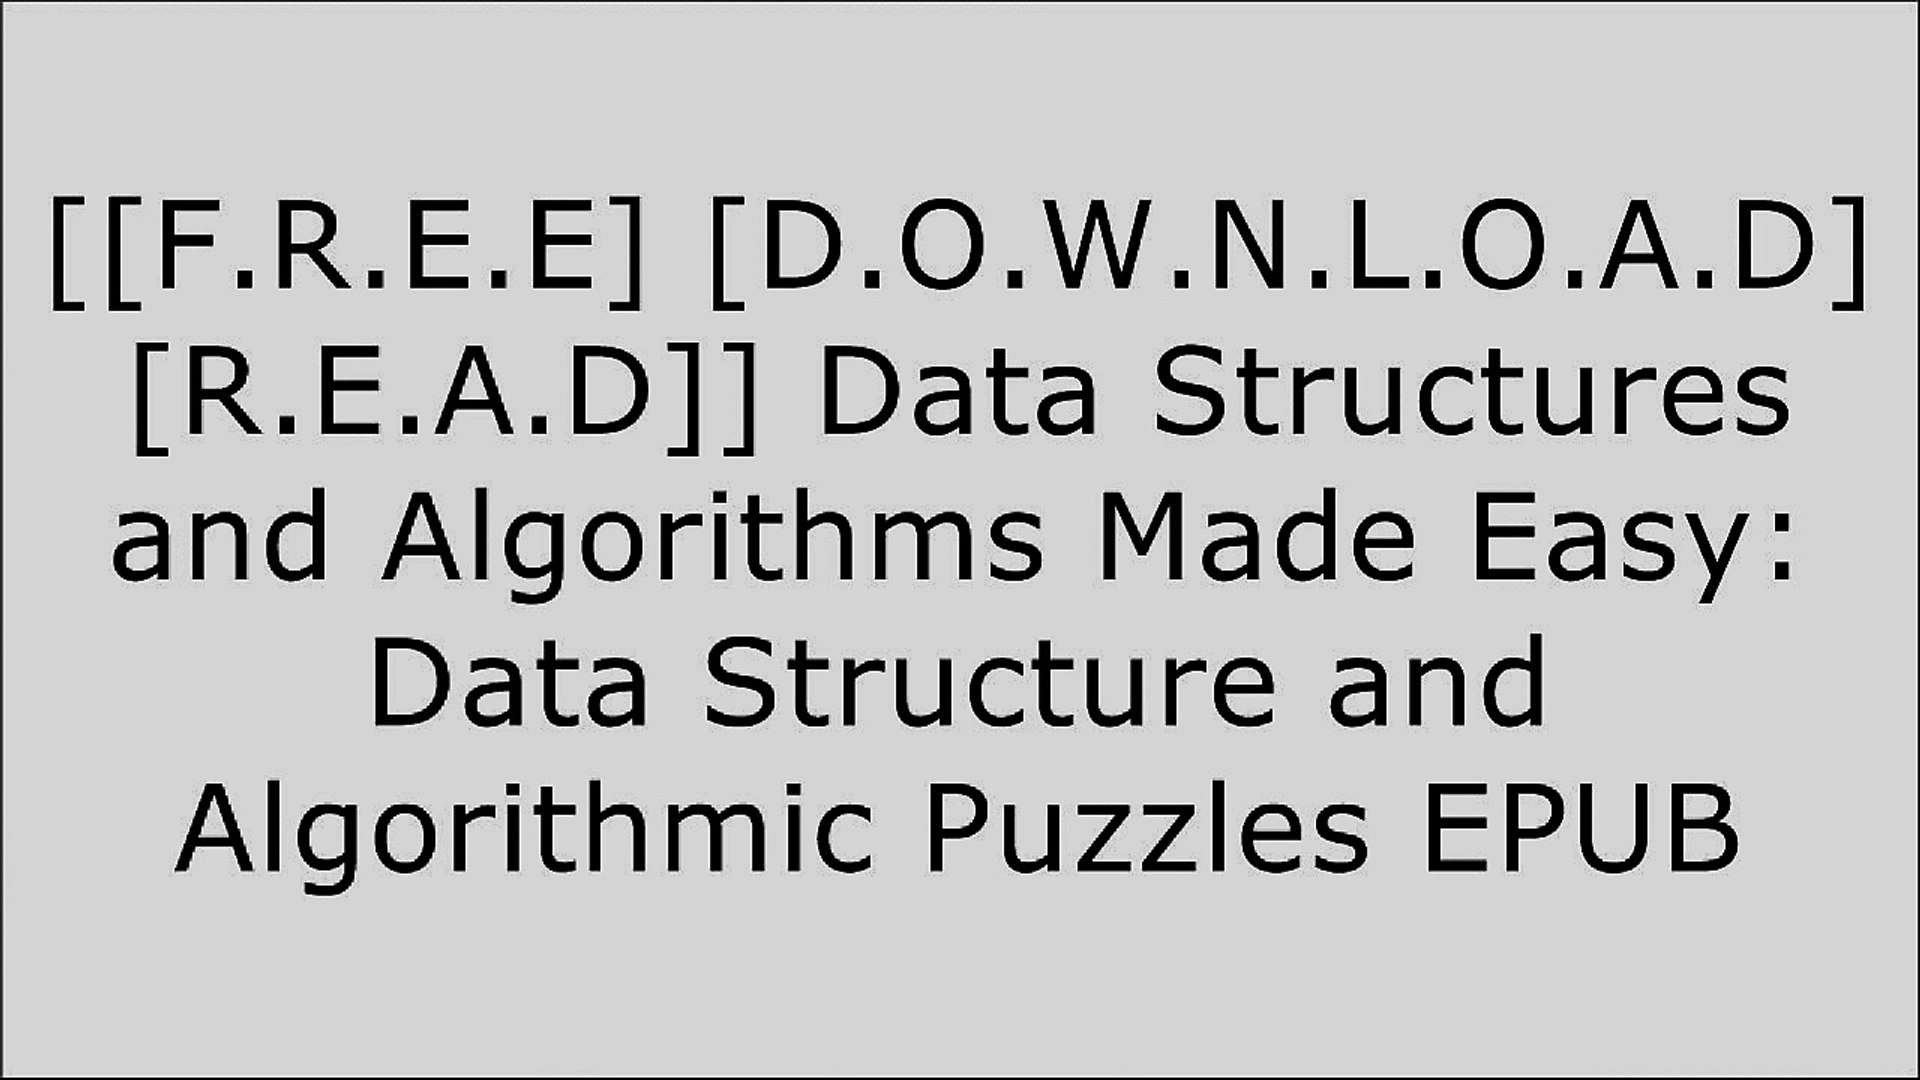 [FKg8e.[F.R.E.E R.E.A.D D.O.W.N.L.O.A.D]] Data Structures and Algorithms Made Easy: Data Structure a